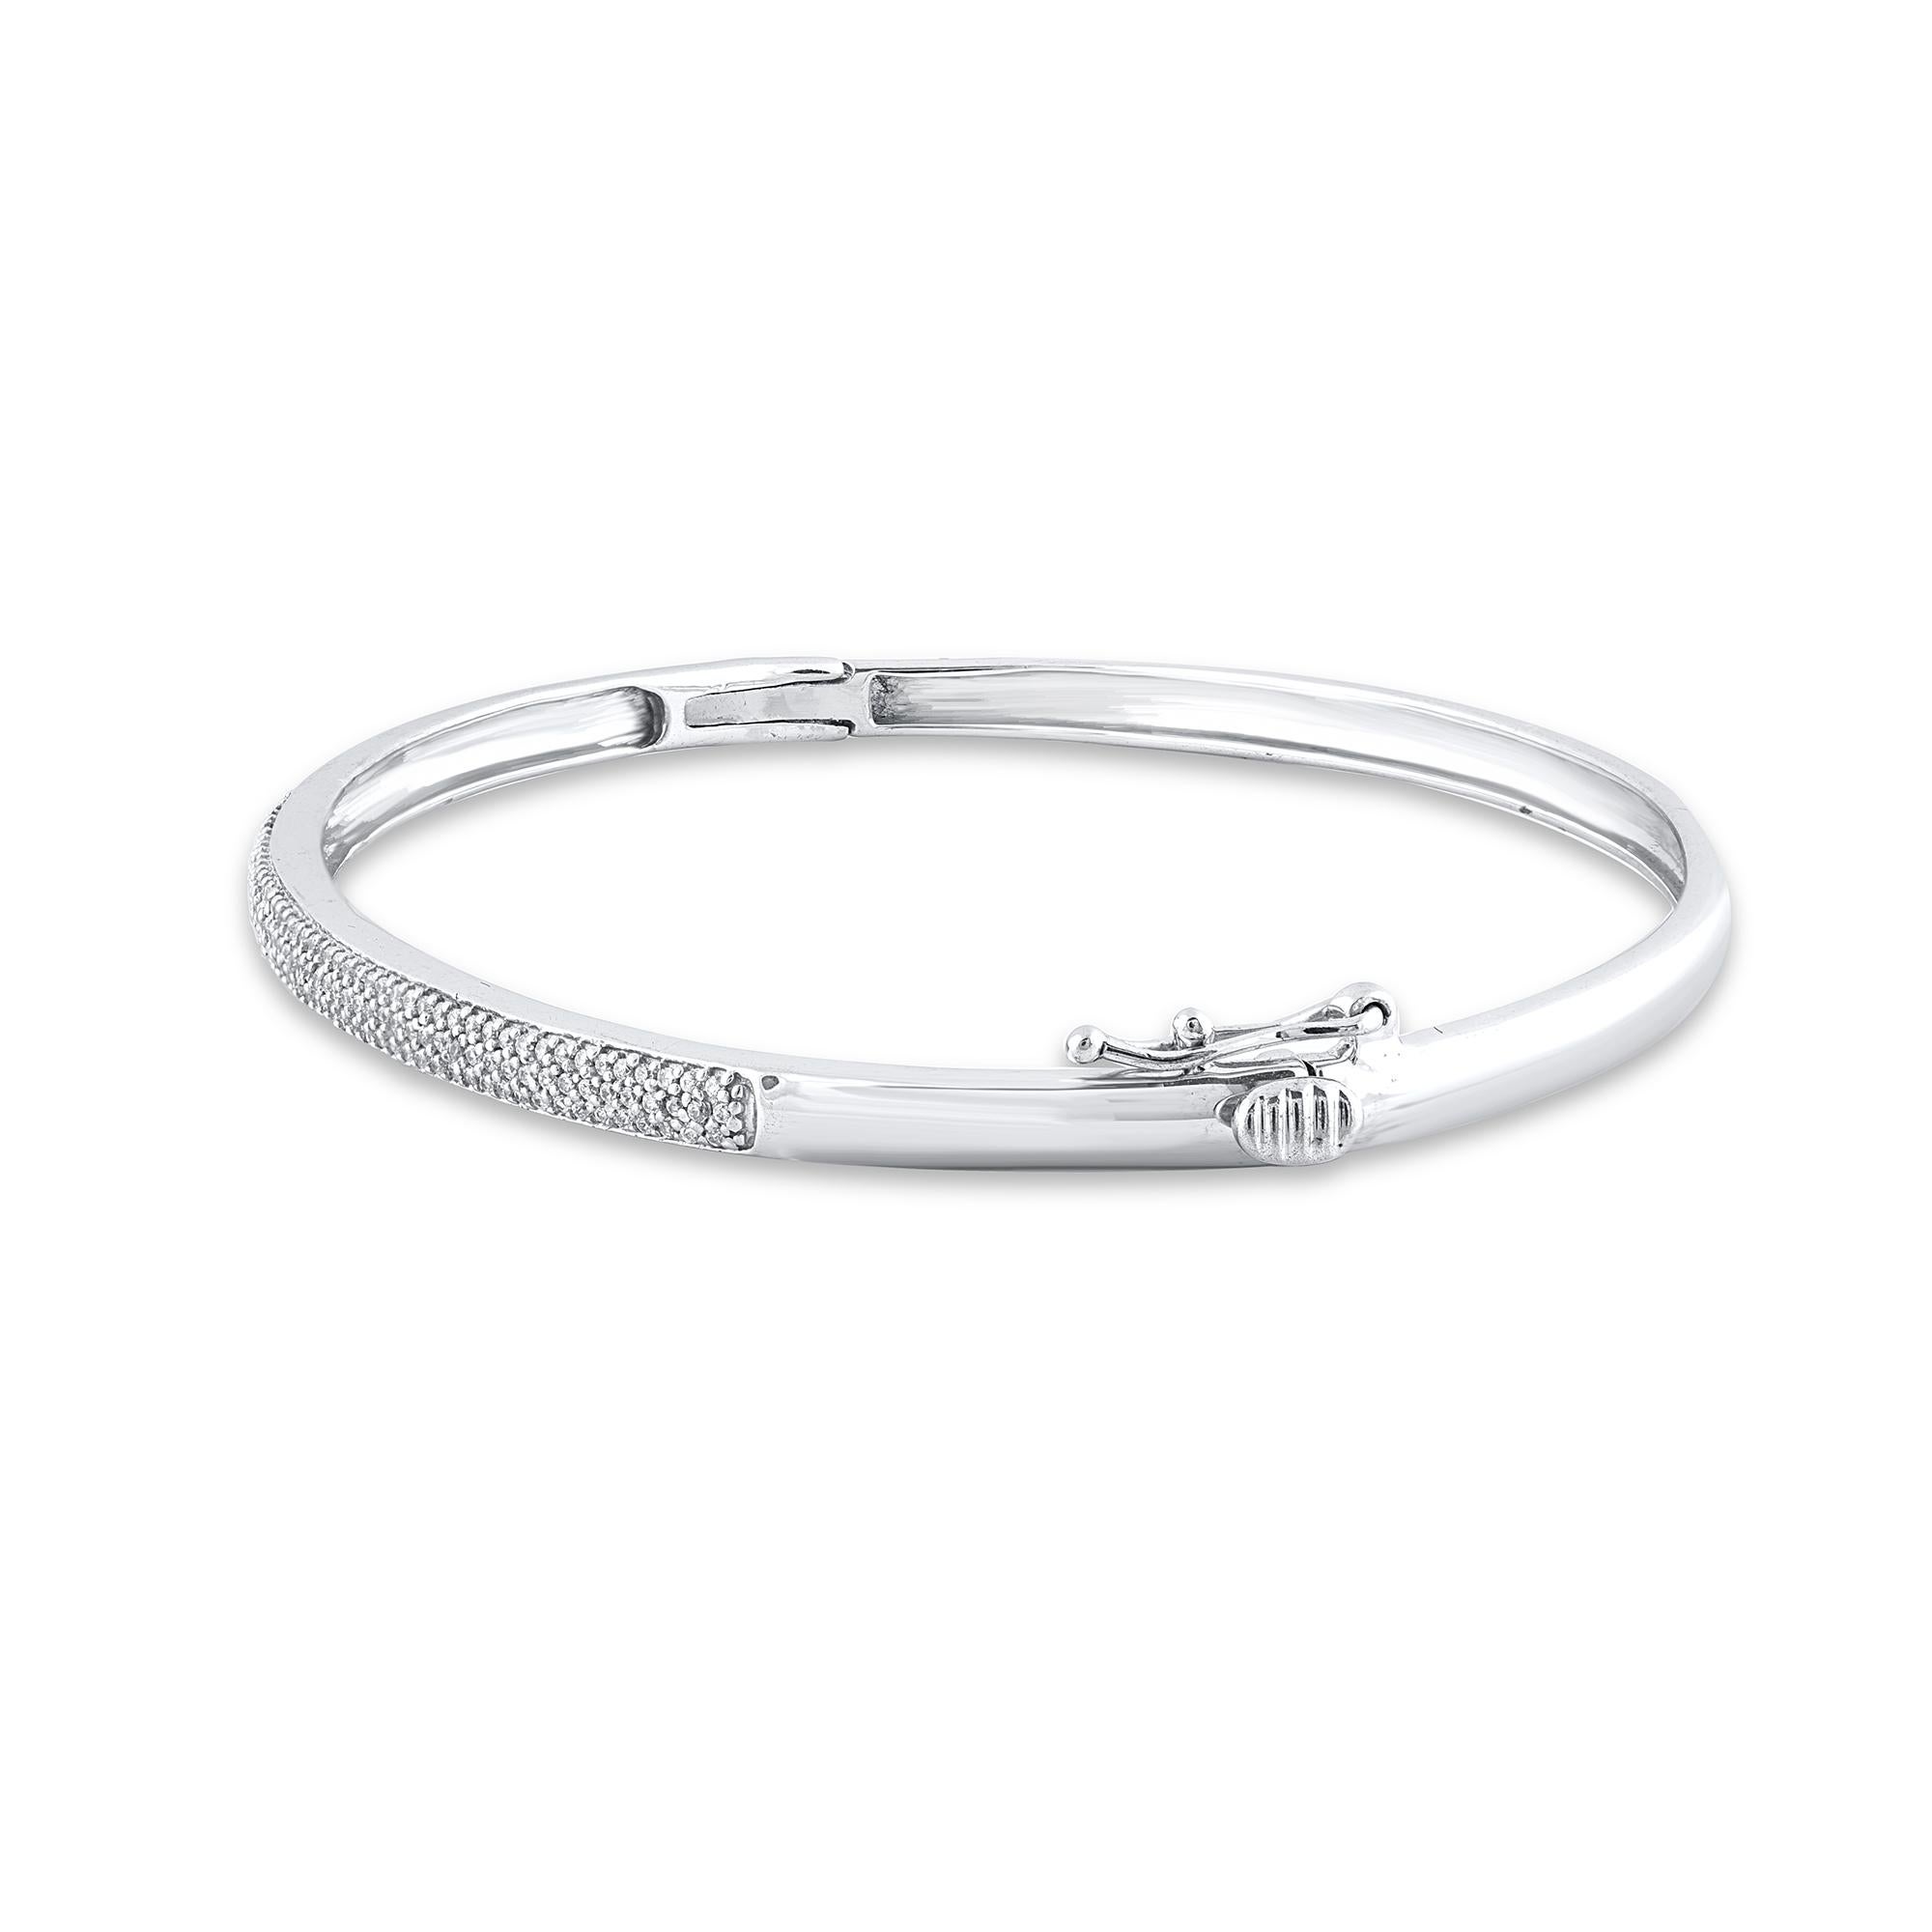 Add a touch of sparkle to any look with this sleek diamond bangle. Embedded with 169 round-cut diamonds set in pave setting and crafted by our inhouse experts in 18 Karat White gold. The total diamond weight is 0.50 carat and it shines brightly in